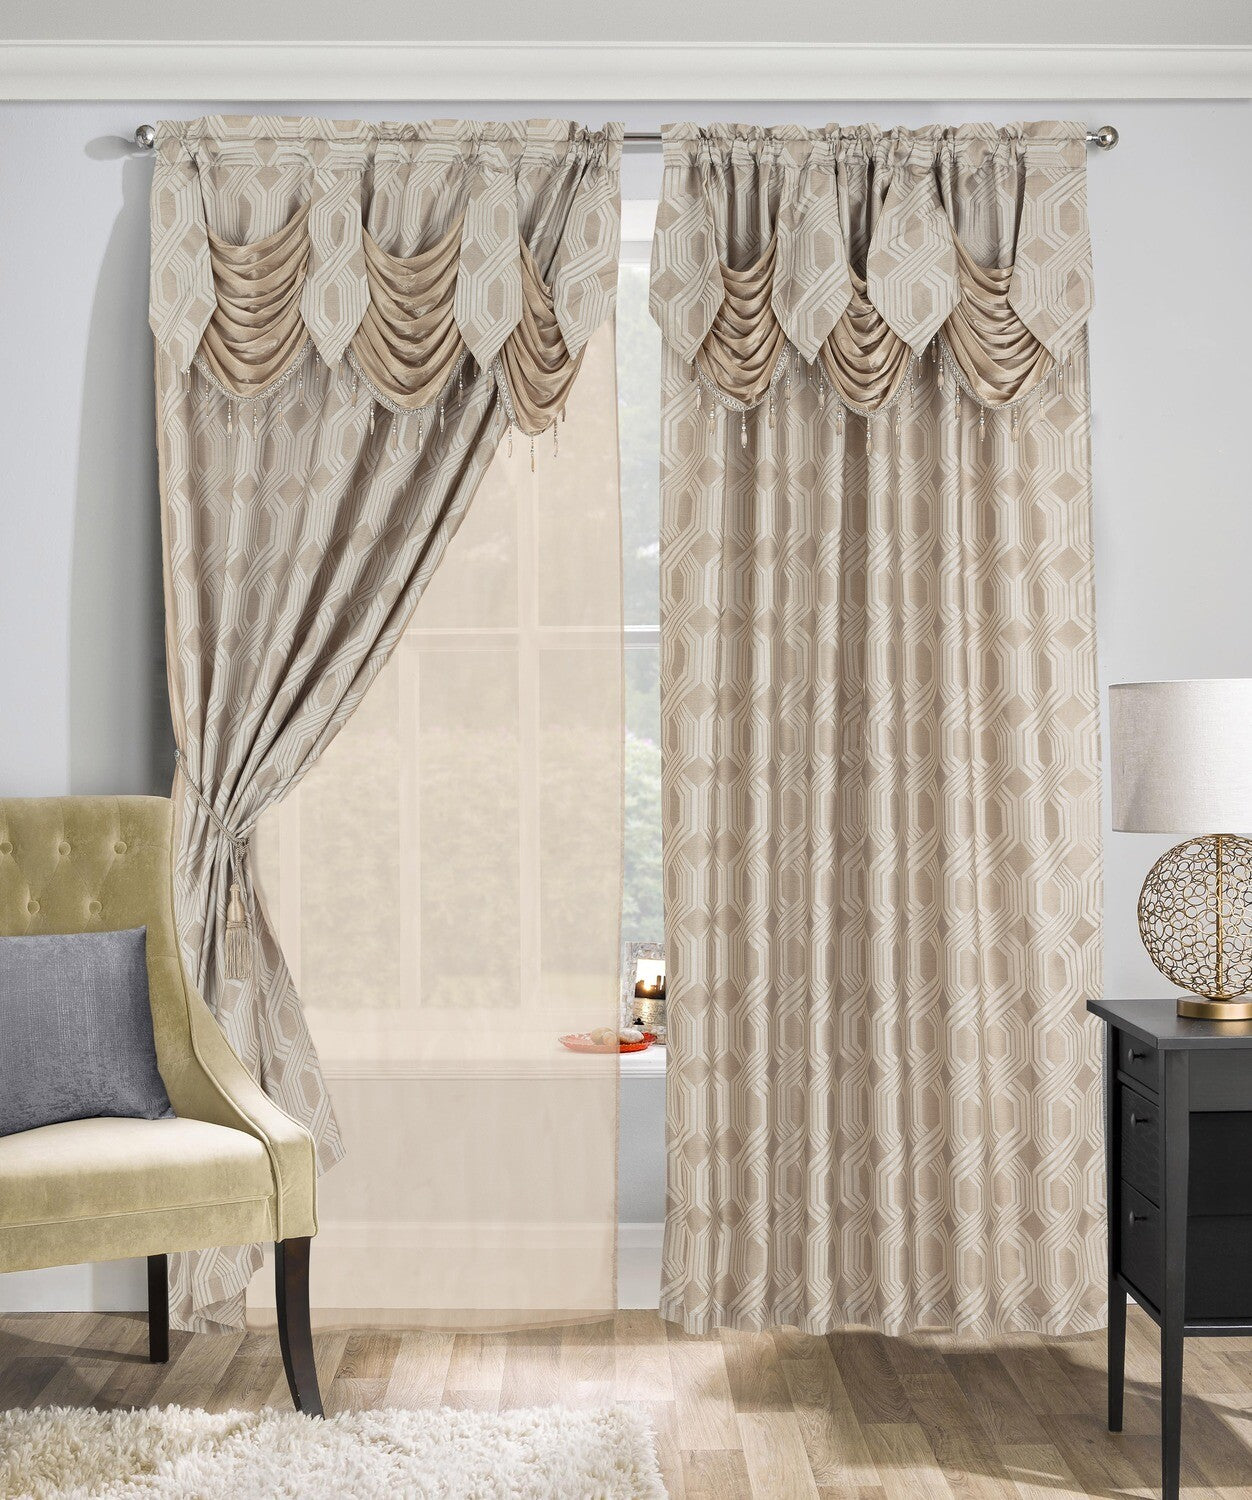 Glory Rugs 2pc Curtain Set with Attached Valance and Backing 55"X84" Each Ragad Light Taupe